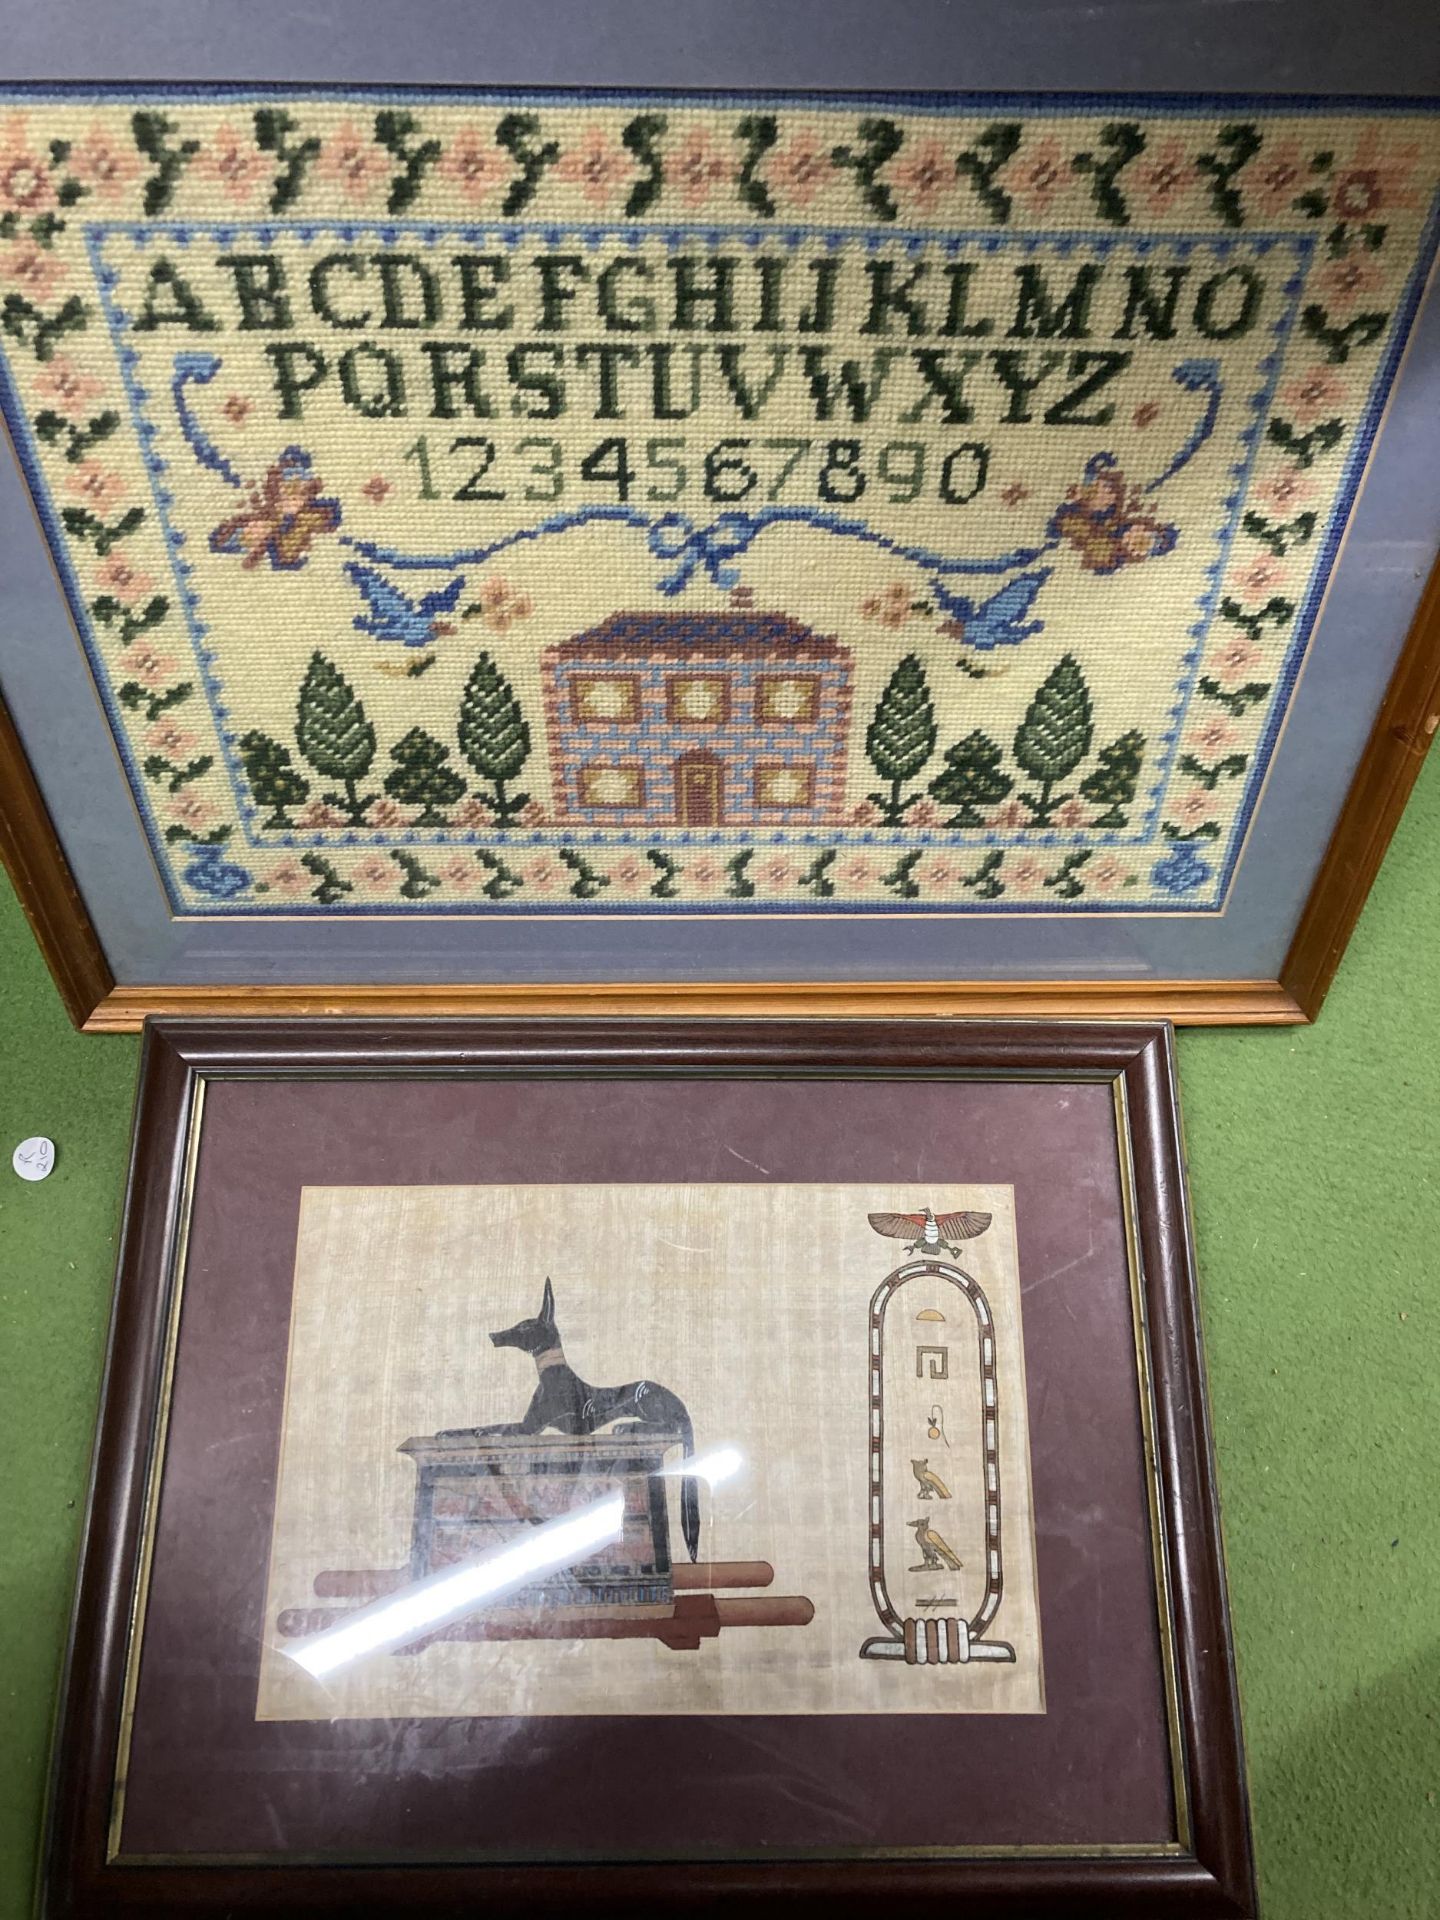 TWO FRAMED PICTURES - ALPHABET EMBROIDERY AND EGYPTIAN EXAMPLE